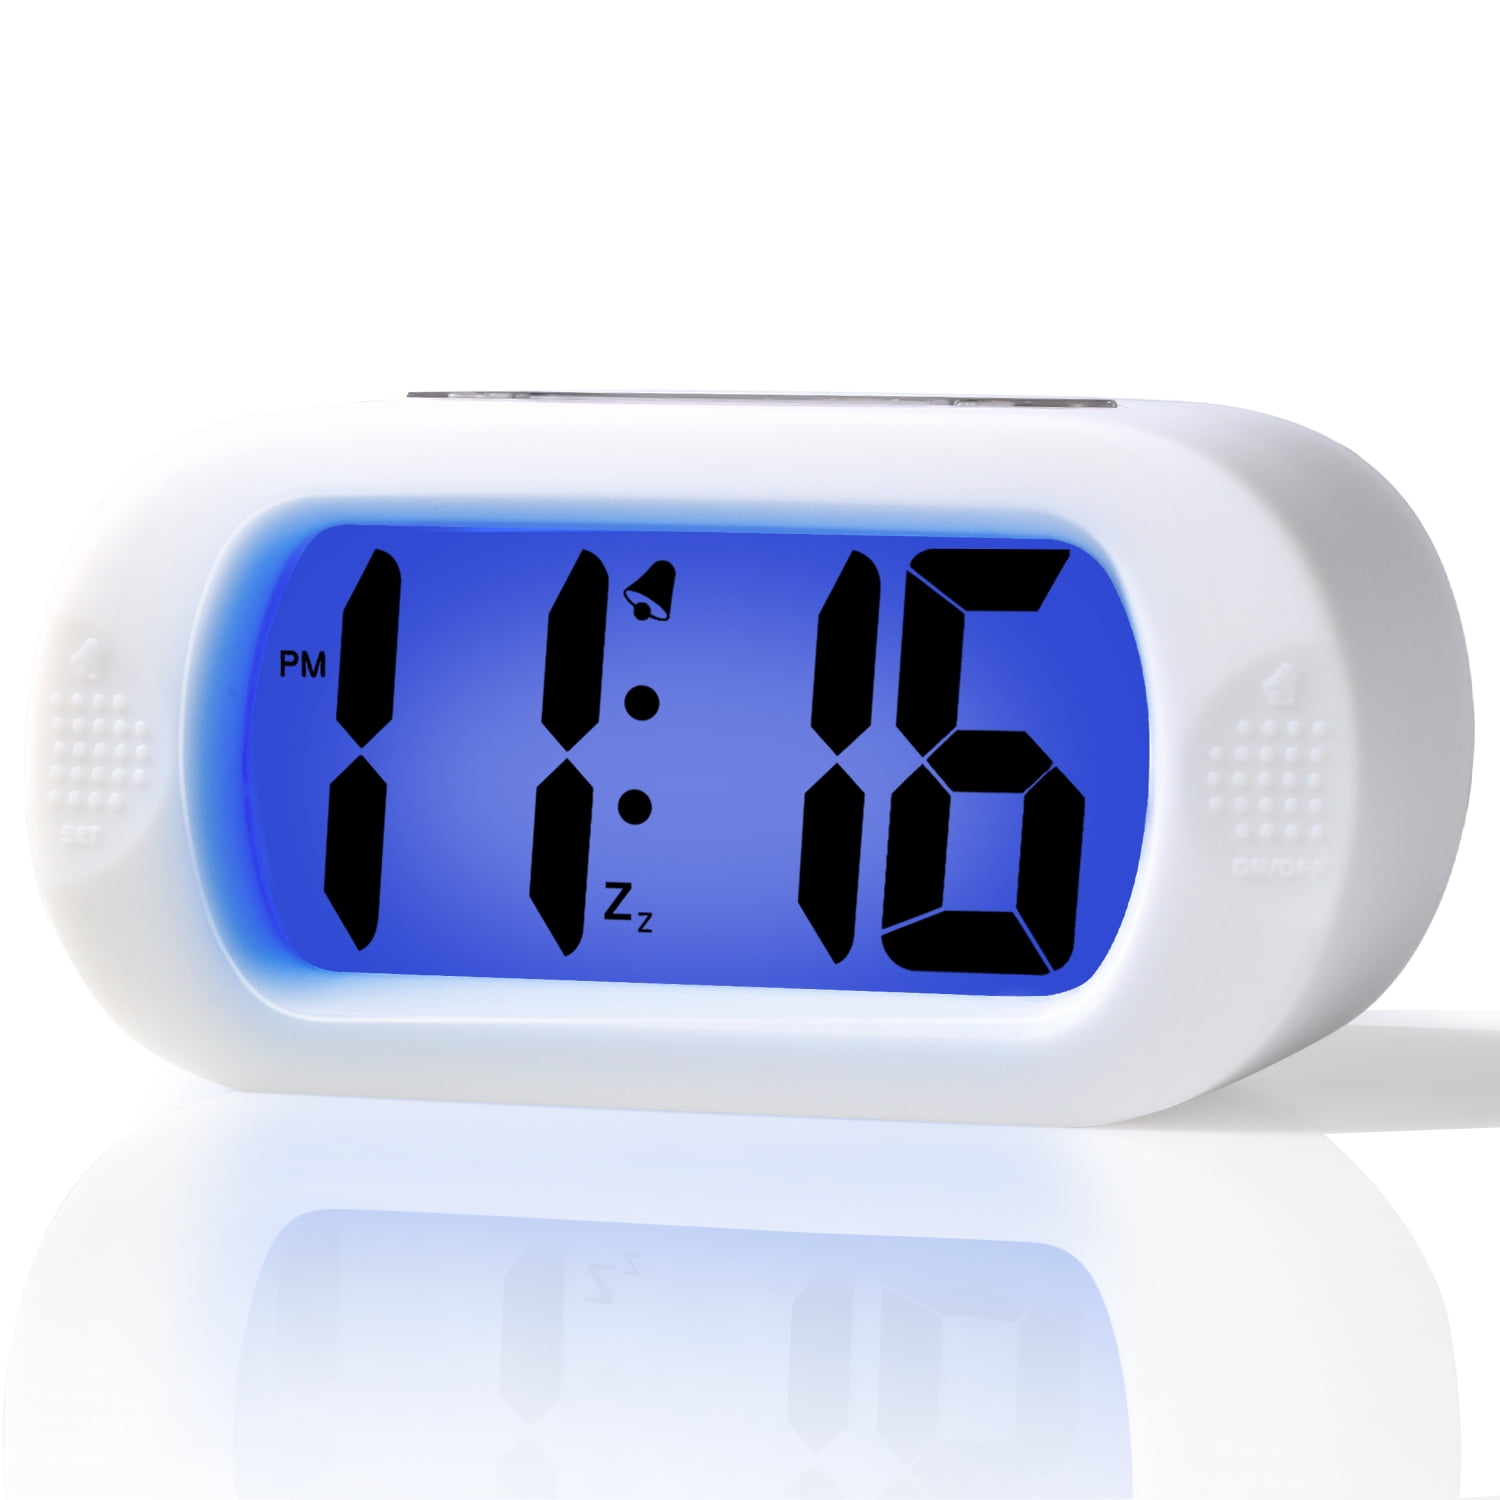 Outlet Powered No Frills Simple Travelwey Home LED Digital Alarm Clock 